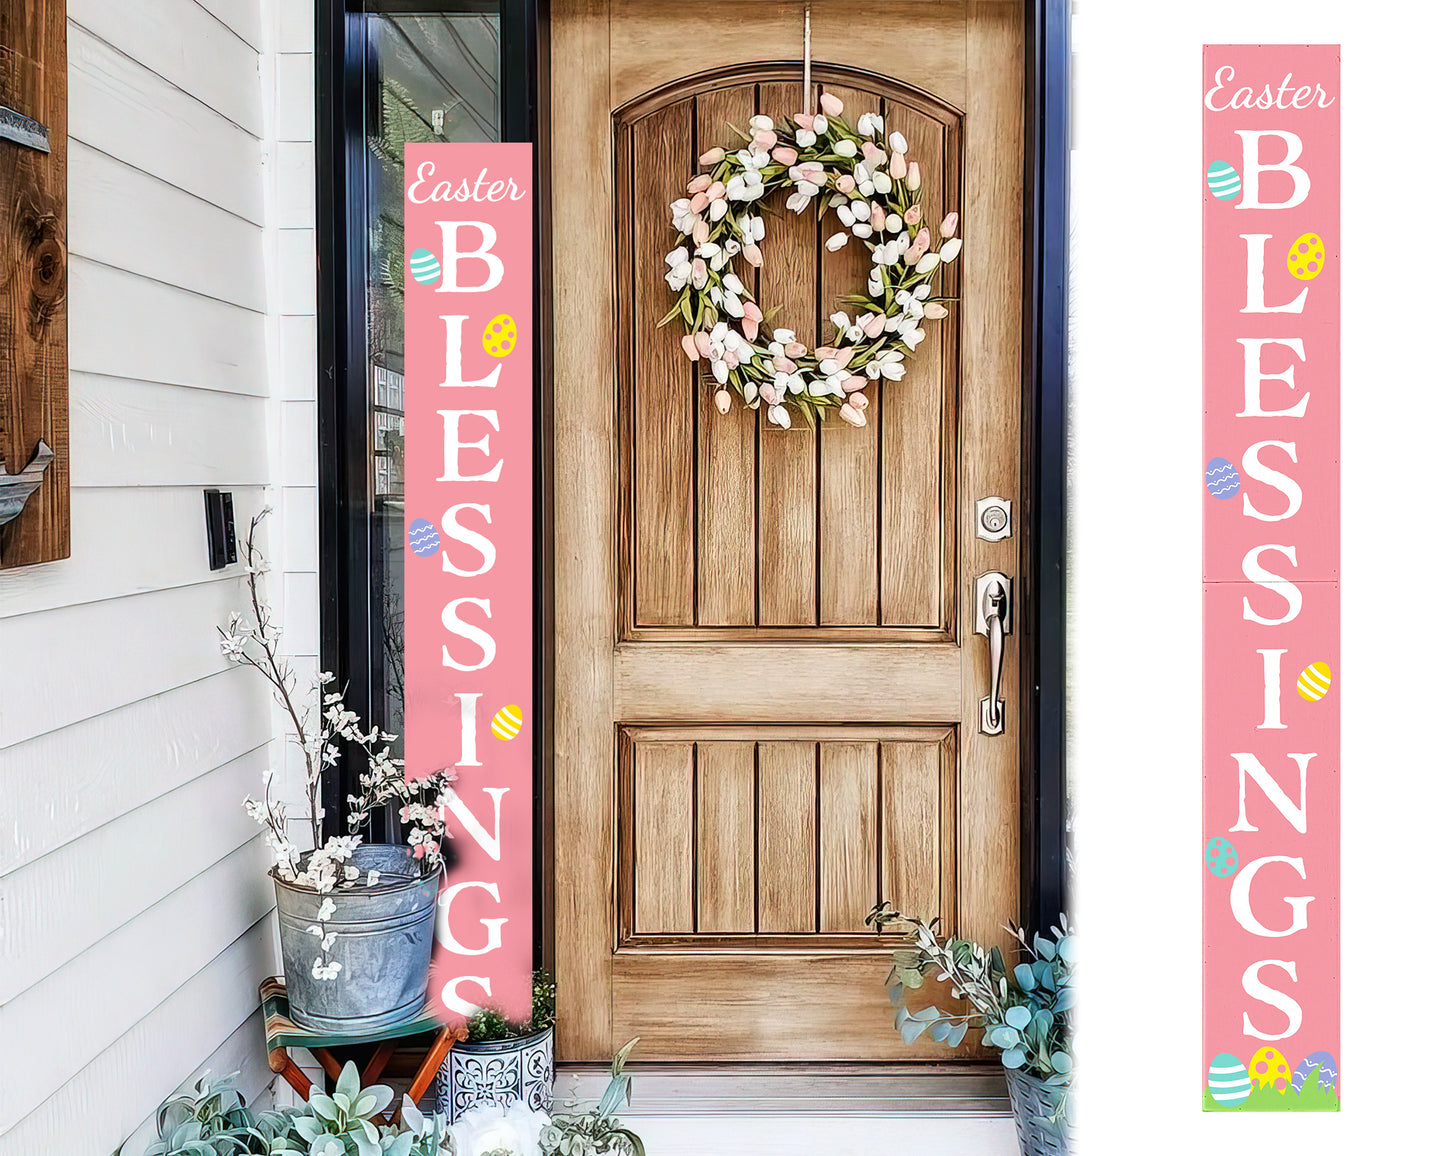 72in Easter Blessings Porch Sign - Easter Decor Sign, Home Front Door Yard Party Decor, Folding Sign, Rustic Farmhouse Party Decor